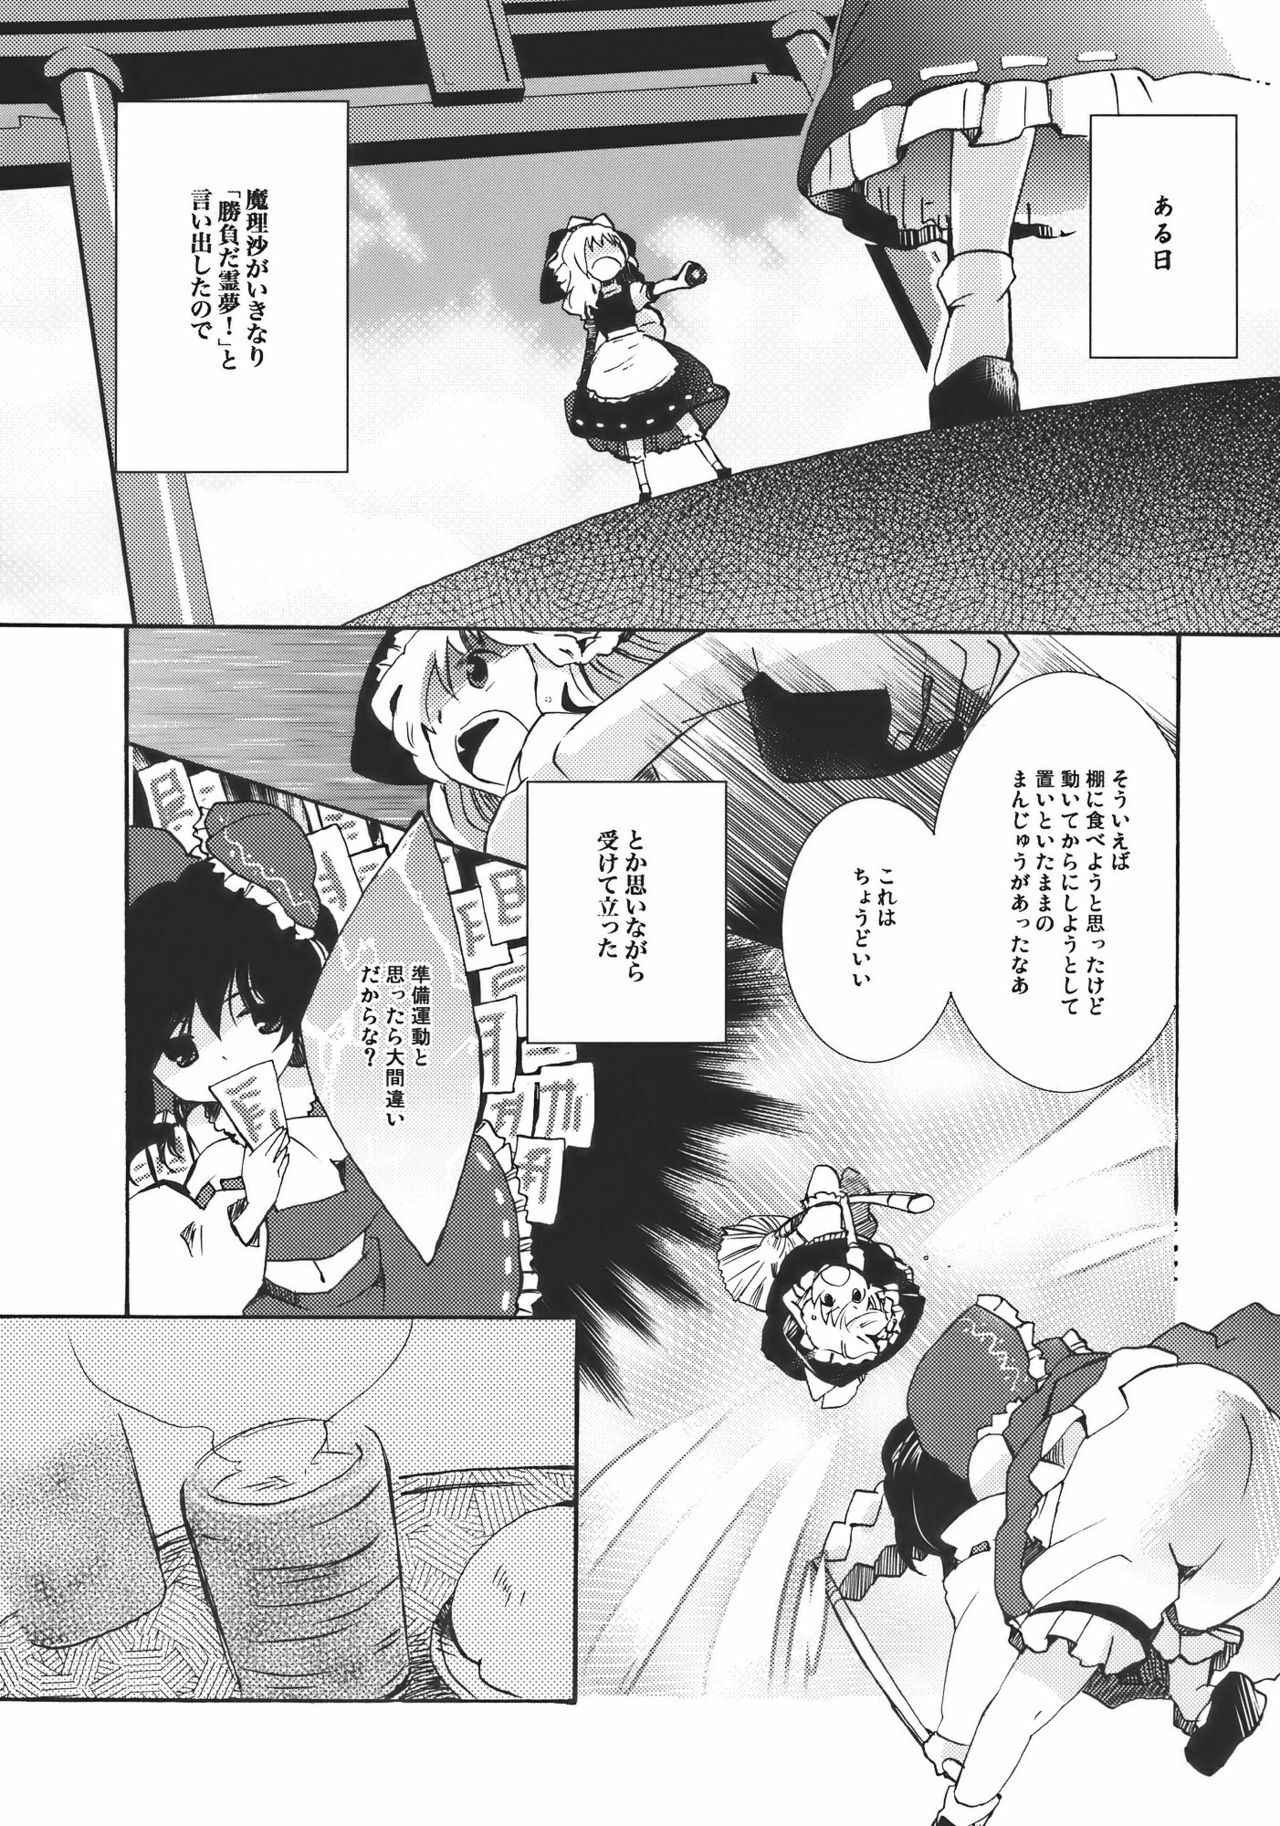 [Oimoto] Yumeiro Dolce (Touhou Project) page 5 full